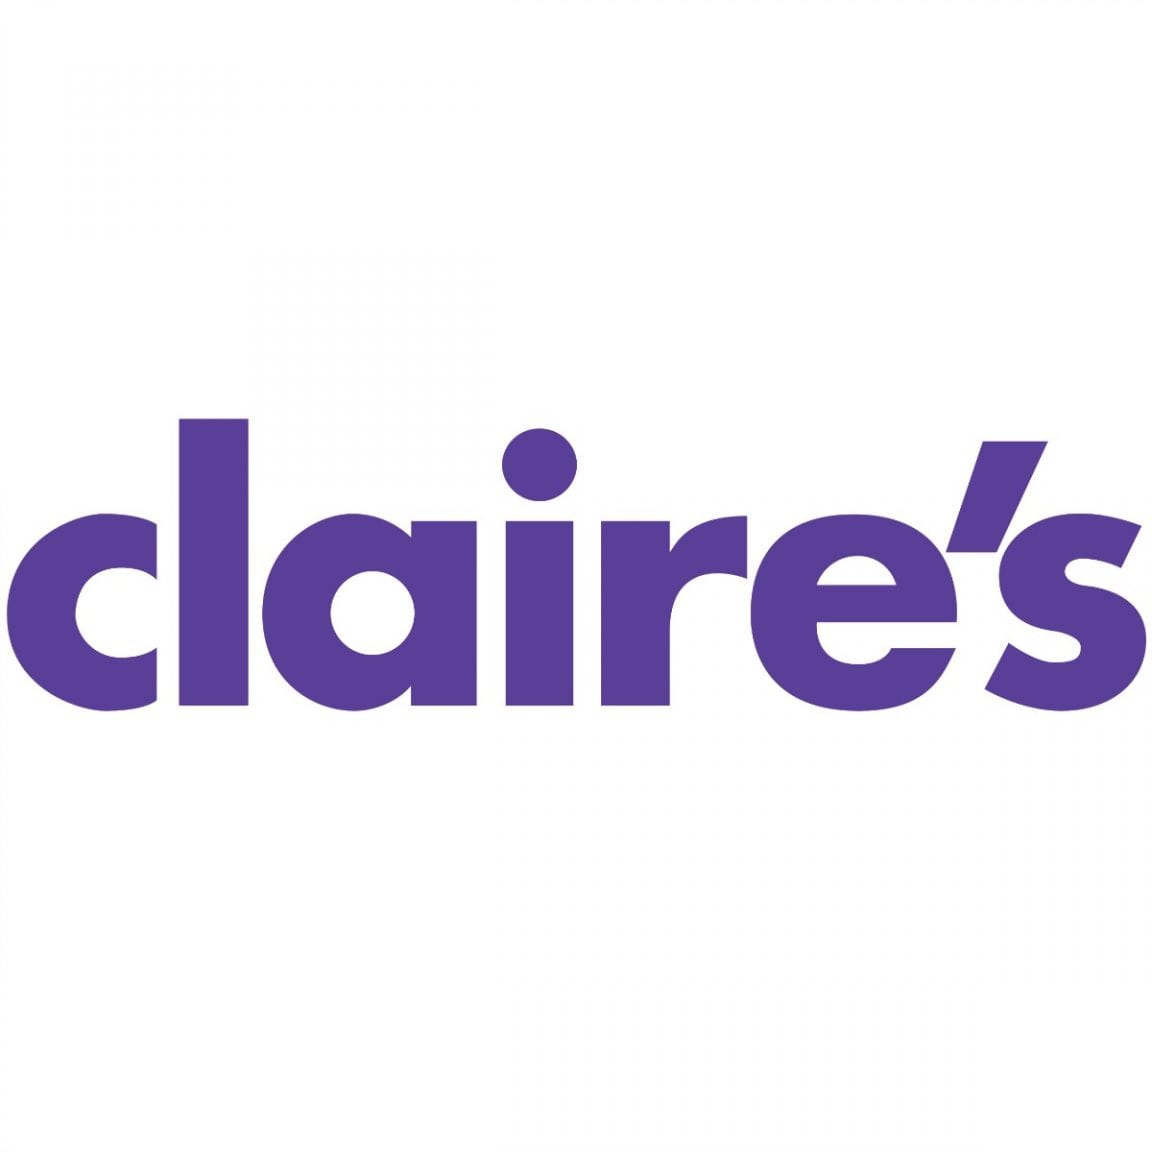 claire-s-gift-card-40-20-off-ebay